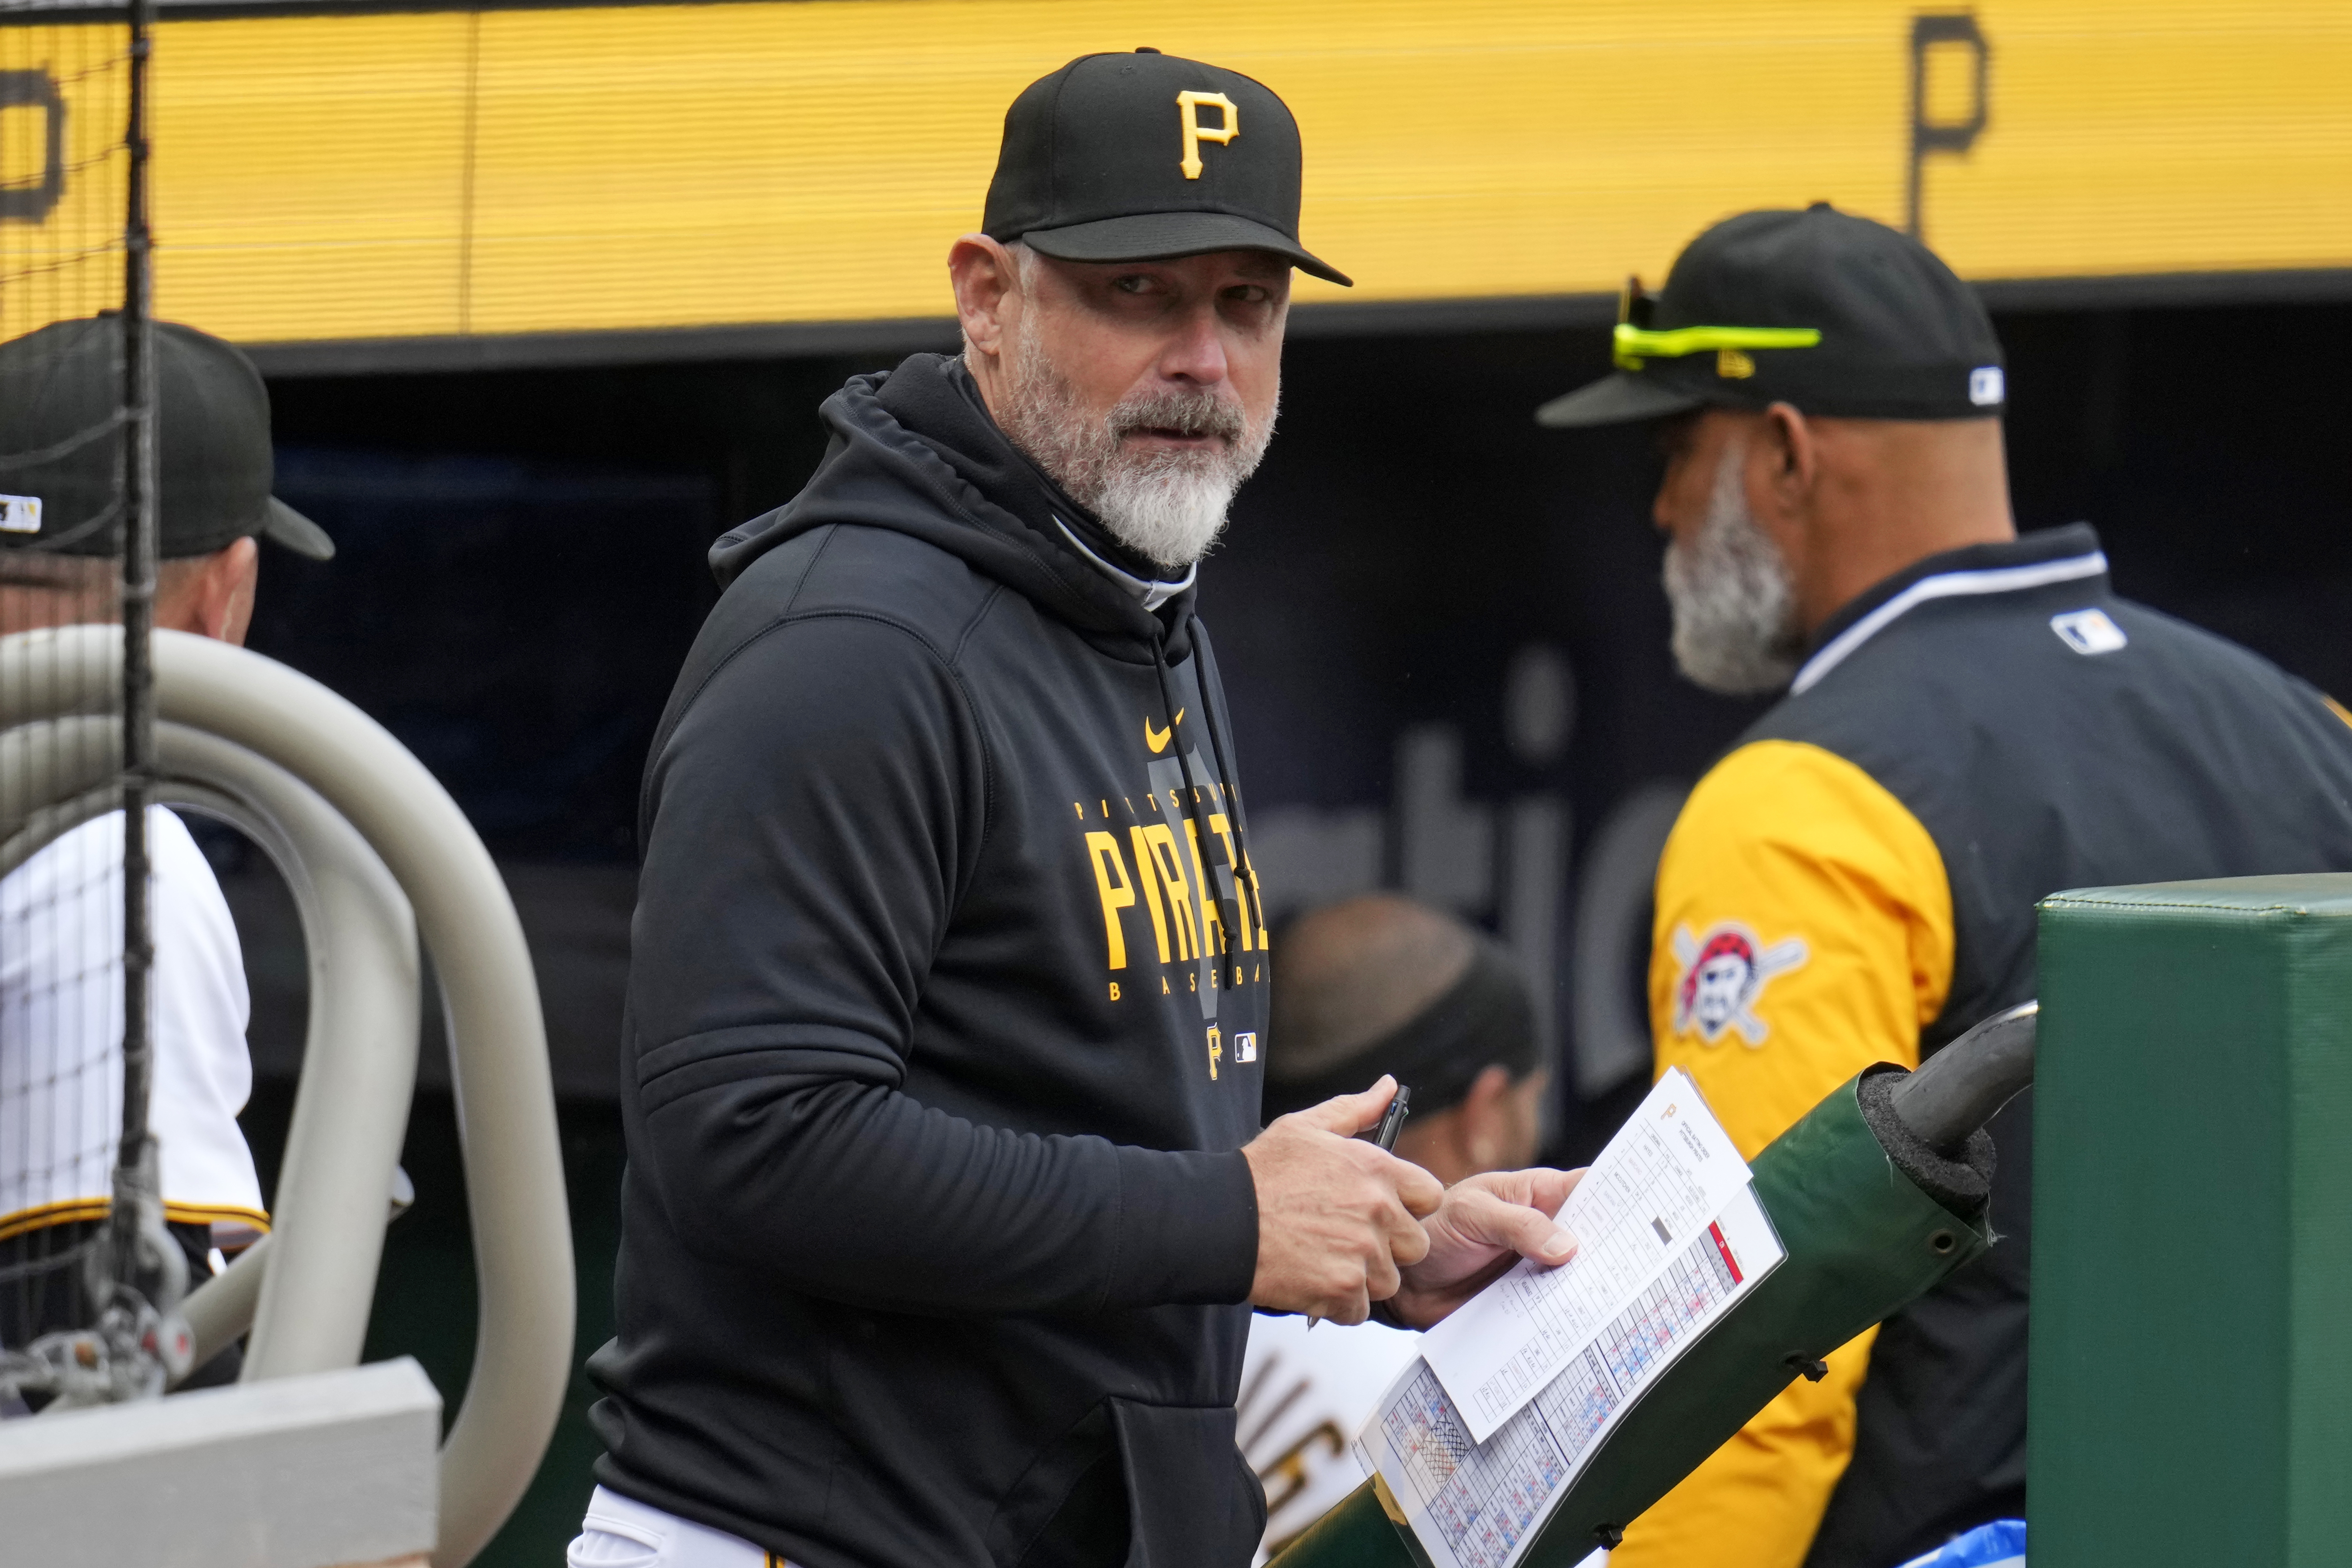 The Pirates are off to their best start since 1992. Should we take